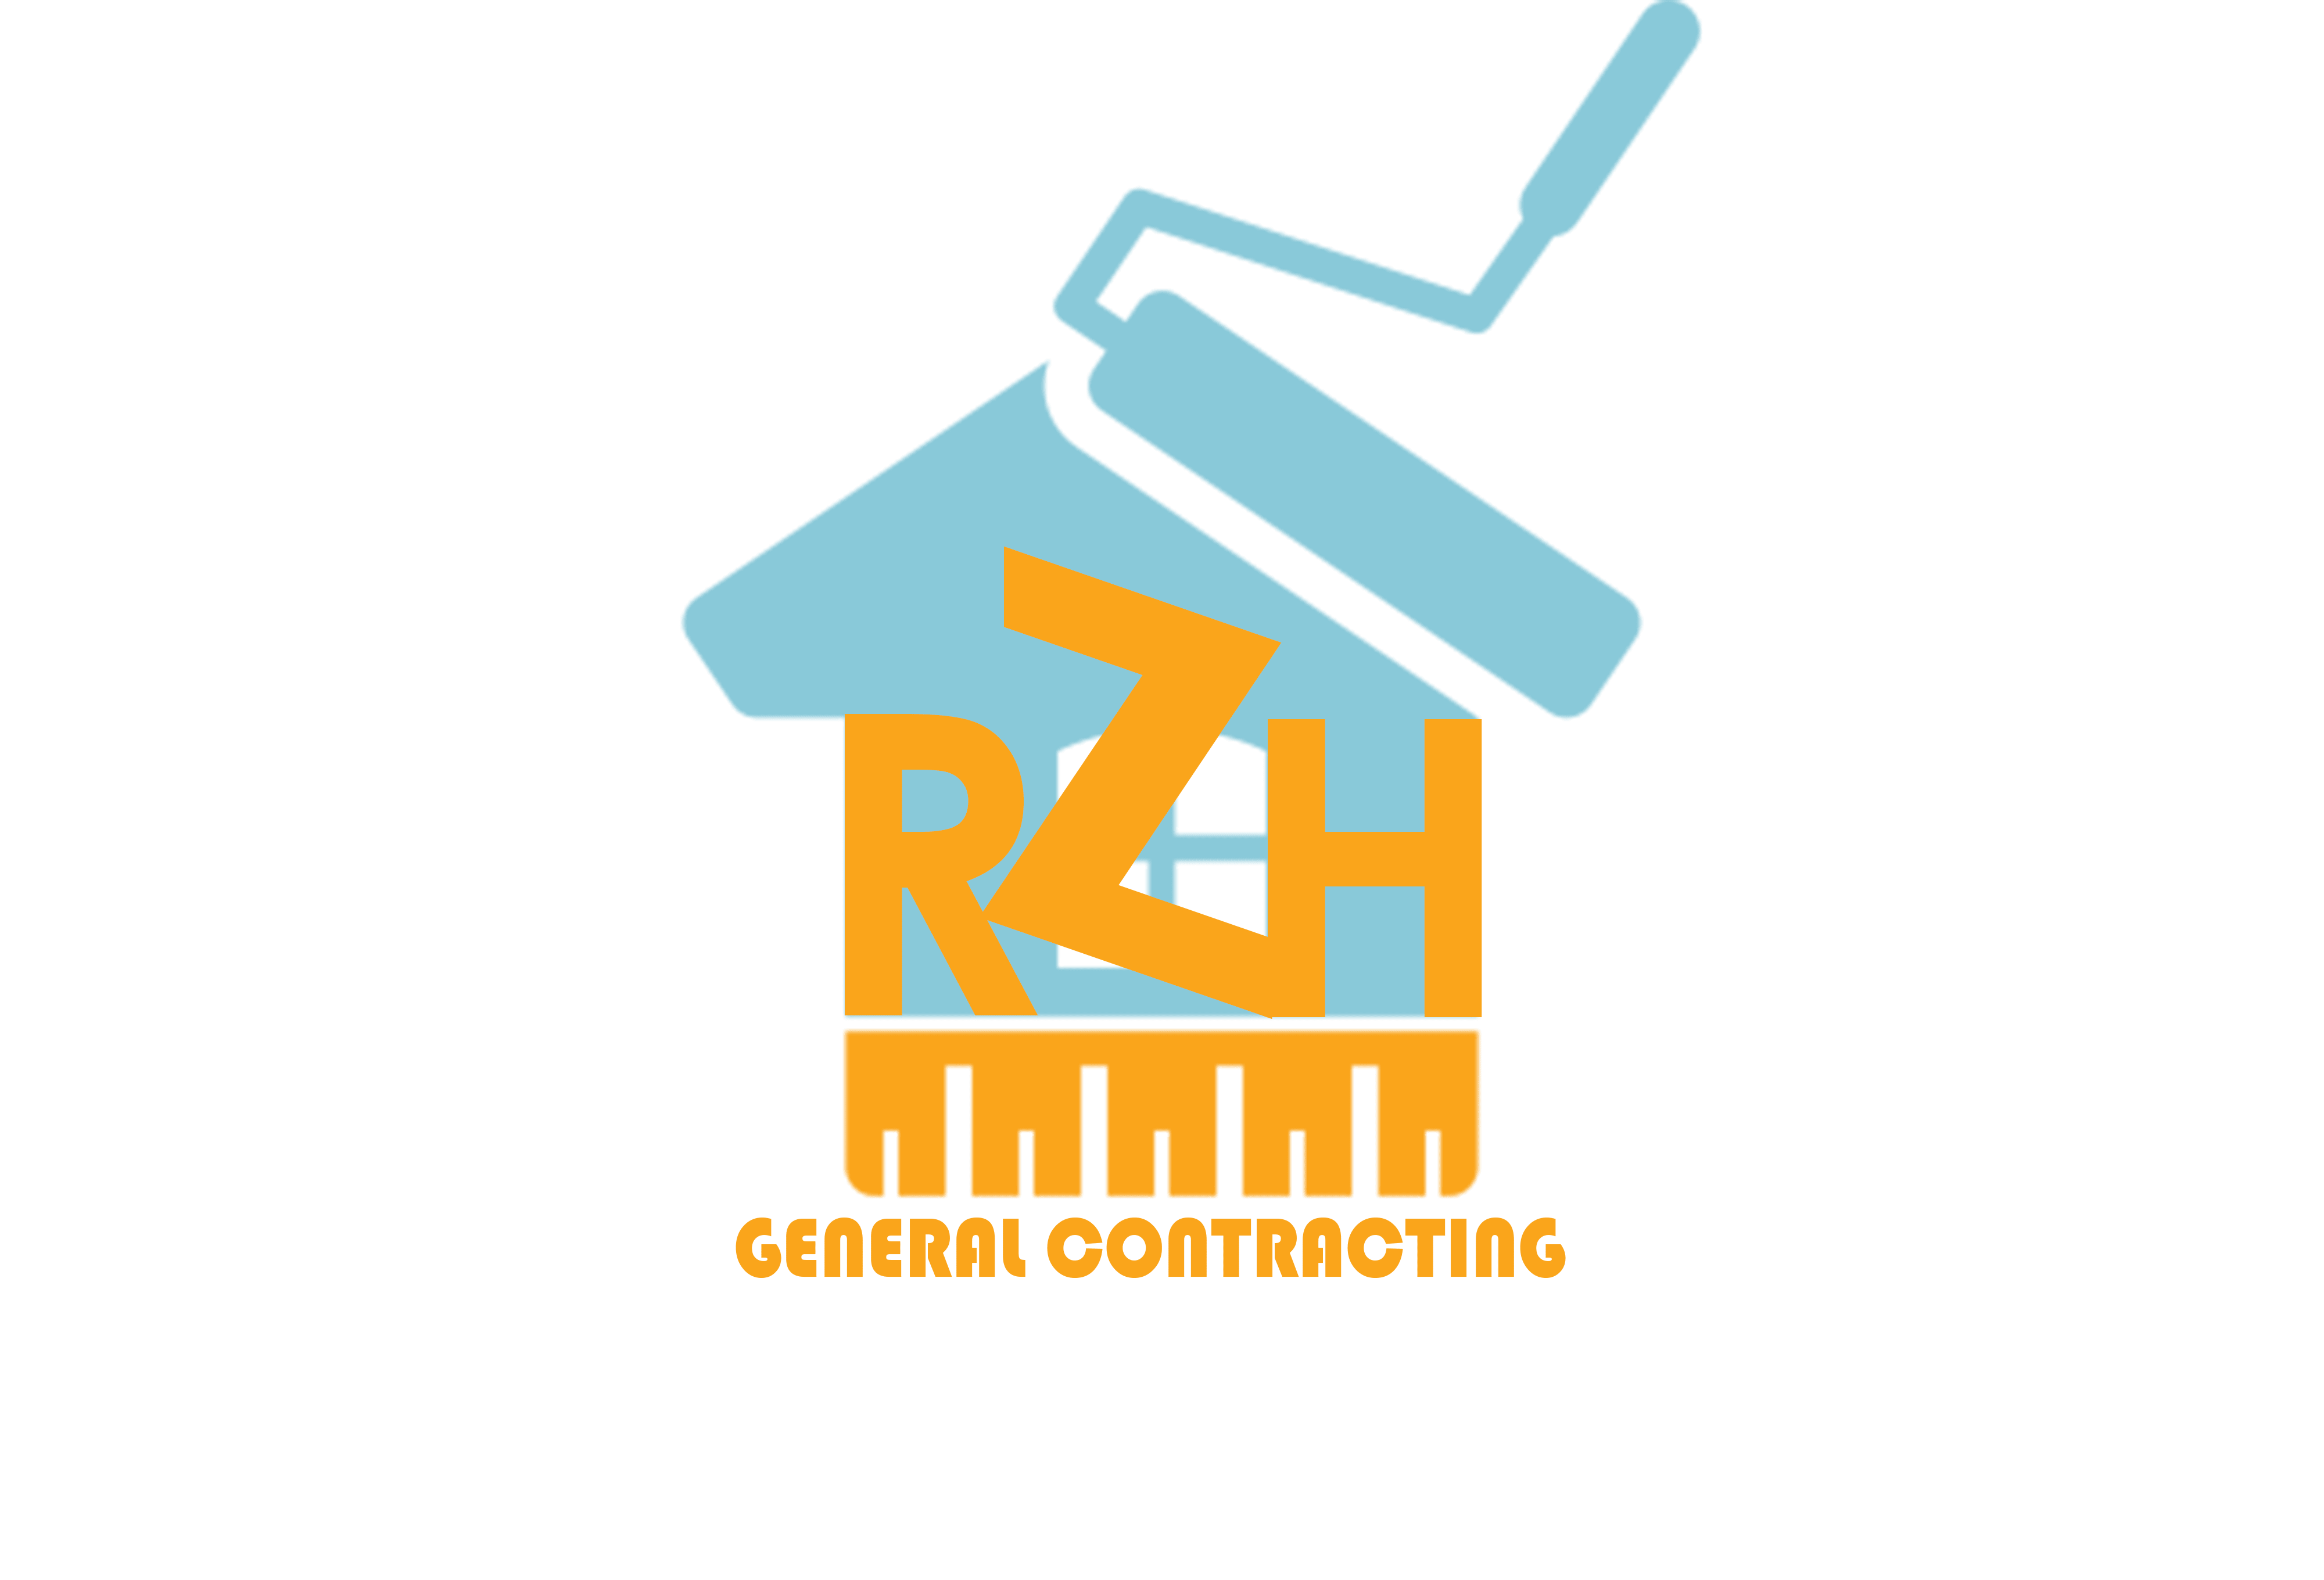 R'Zh General Contracting